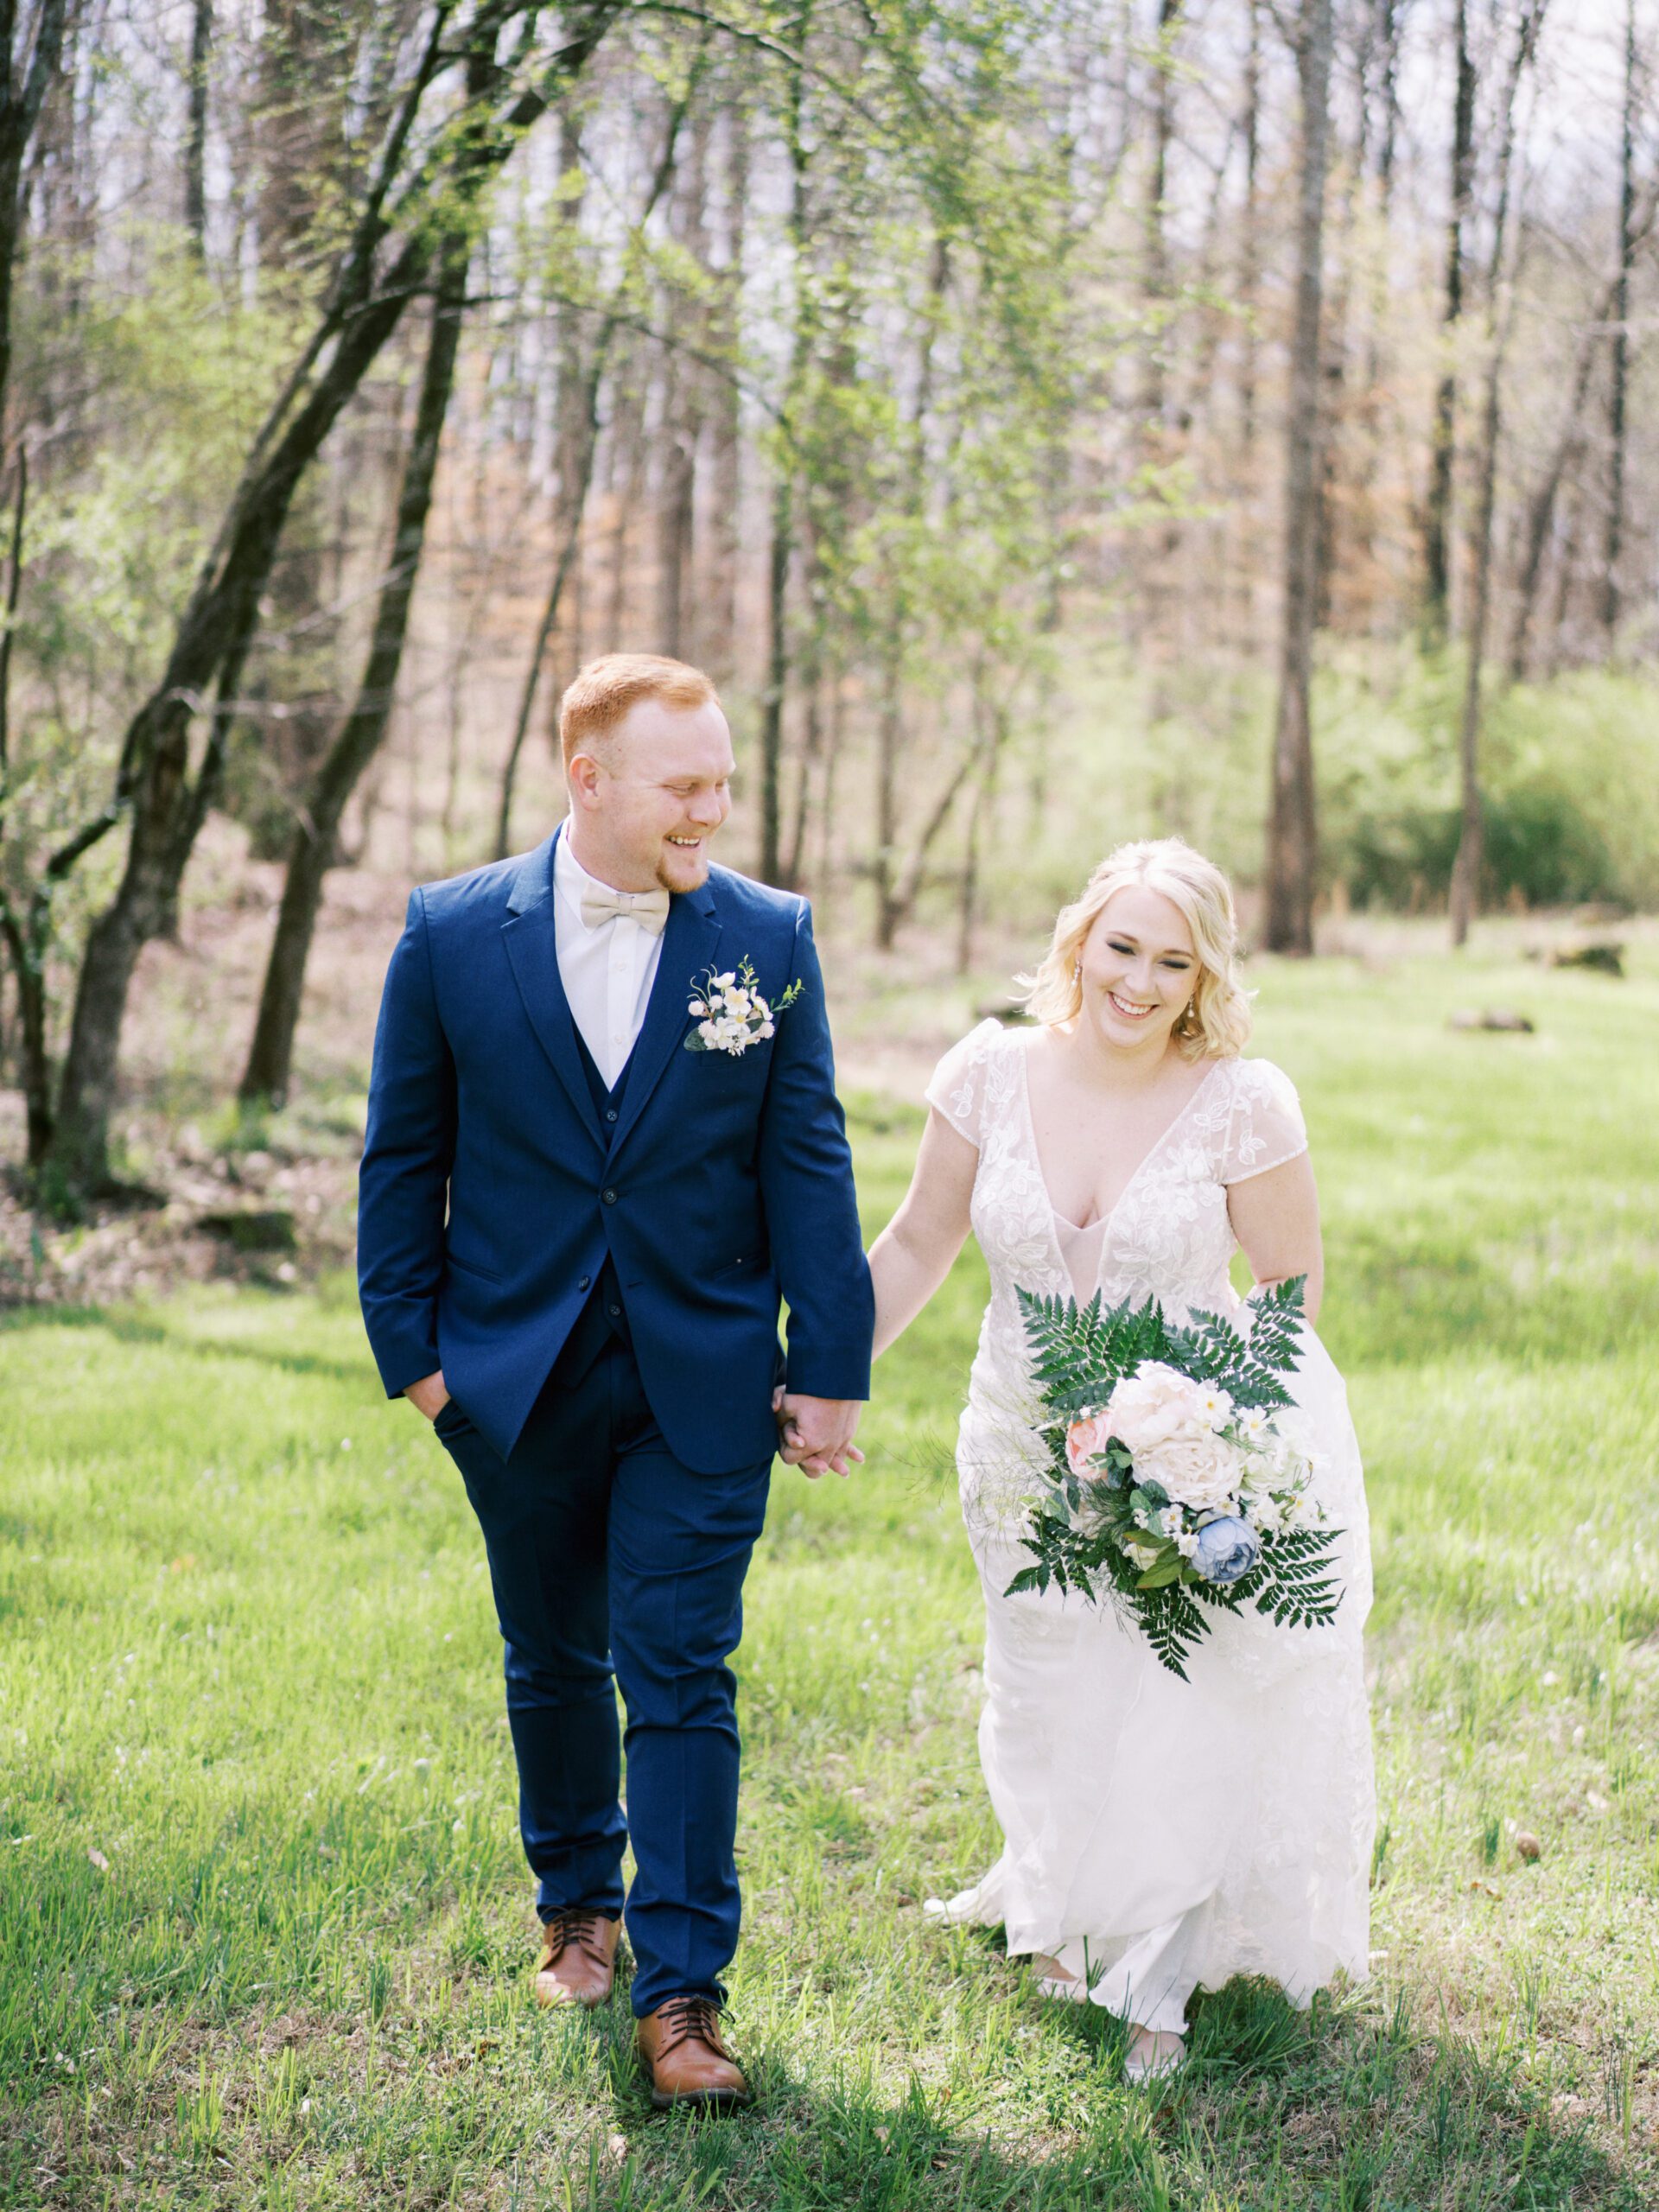 The bride and groom outside on a spring day at Dry Creek Chapel in Leesburg, Alabama